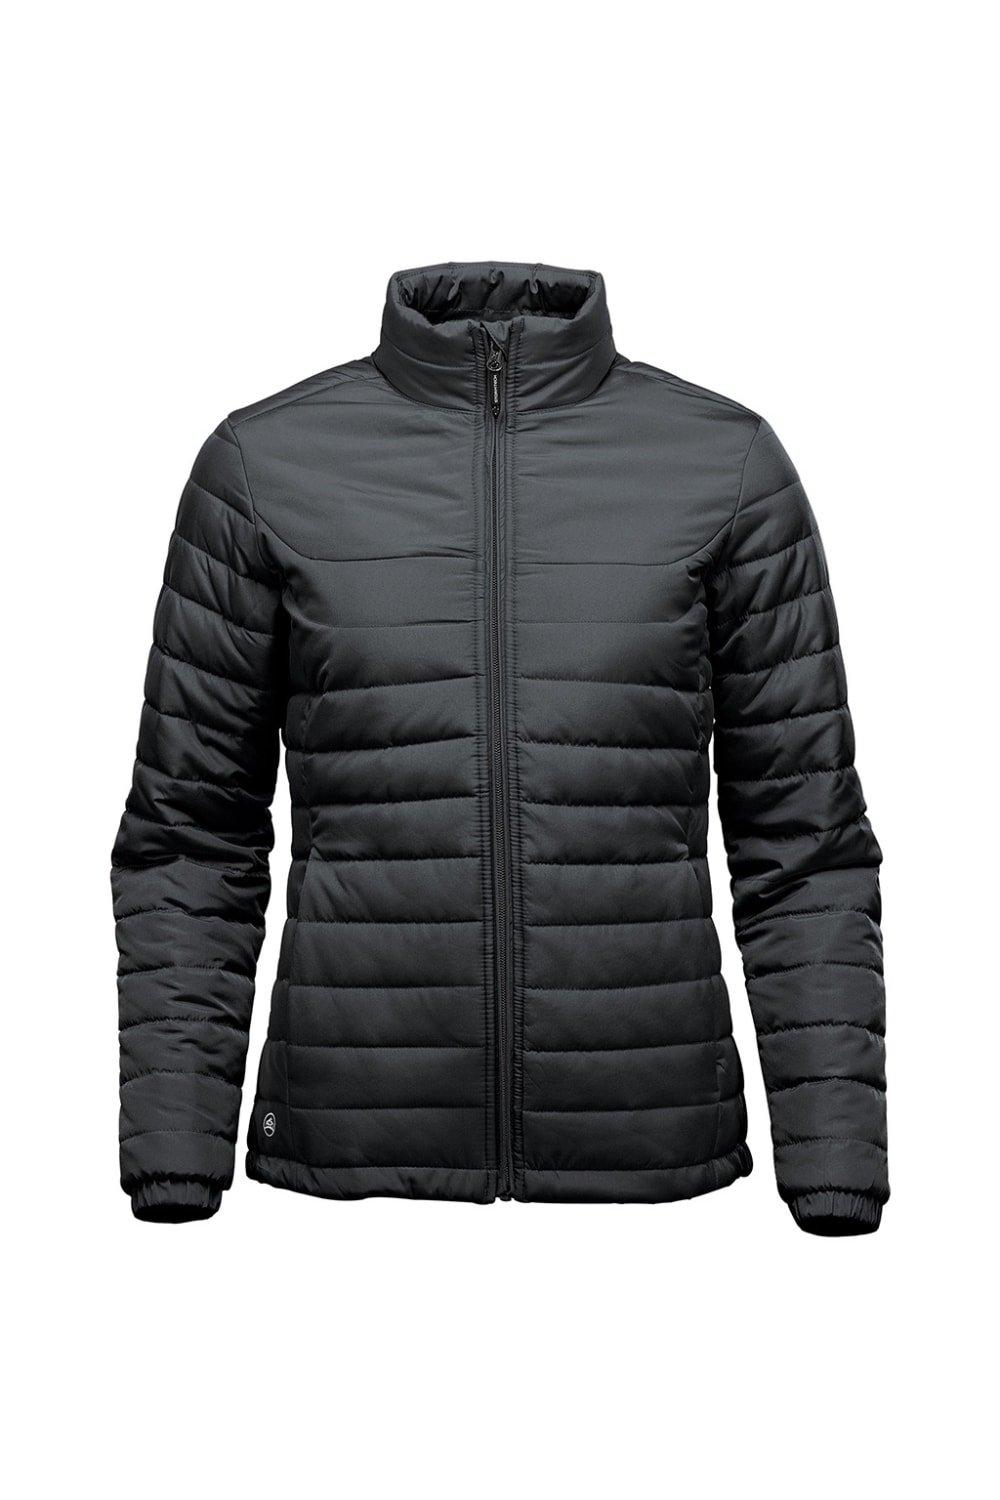 Stormtech Women's Nautilus Quilted Padded Jacket|Size: S|black